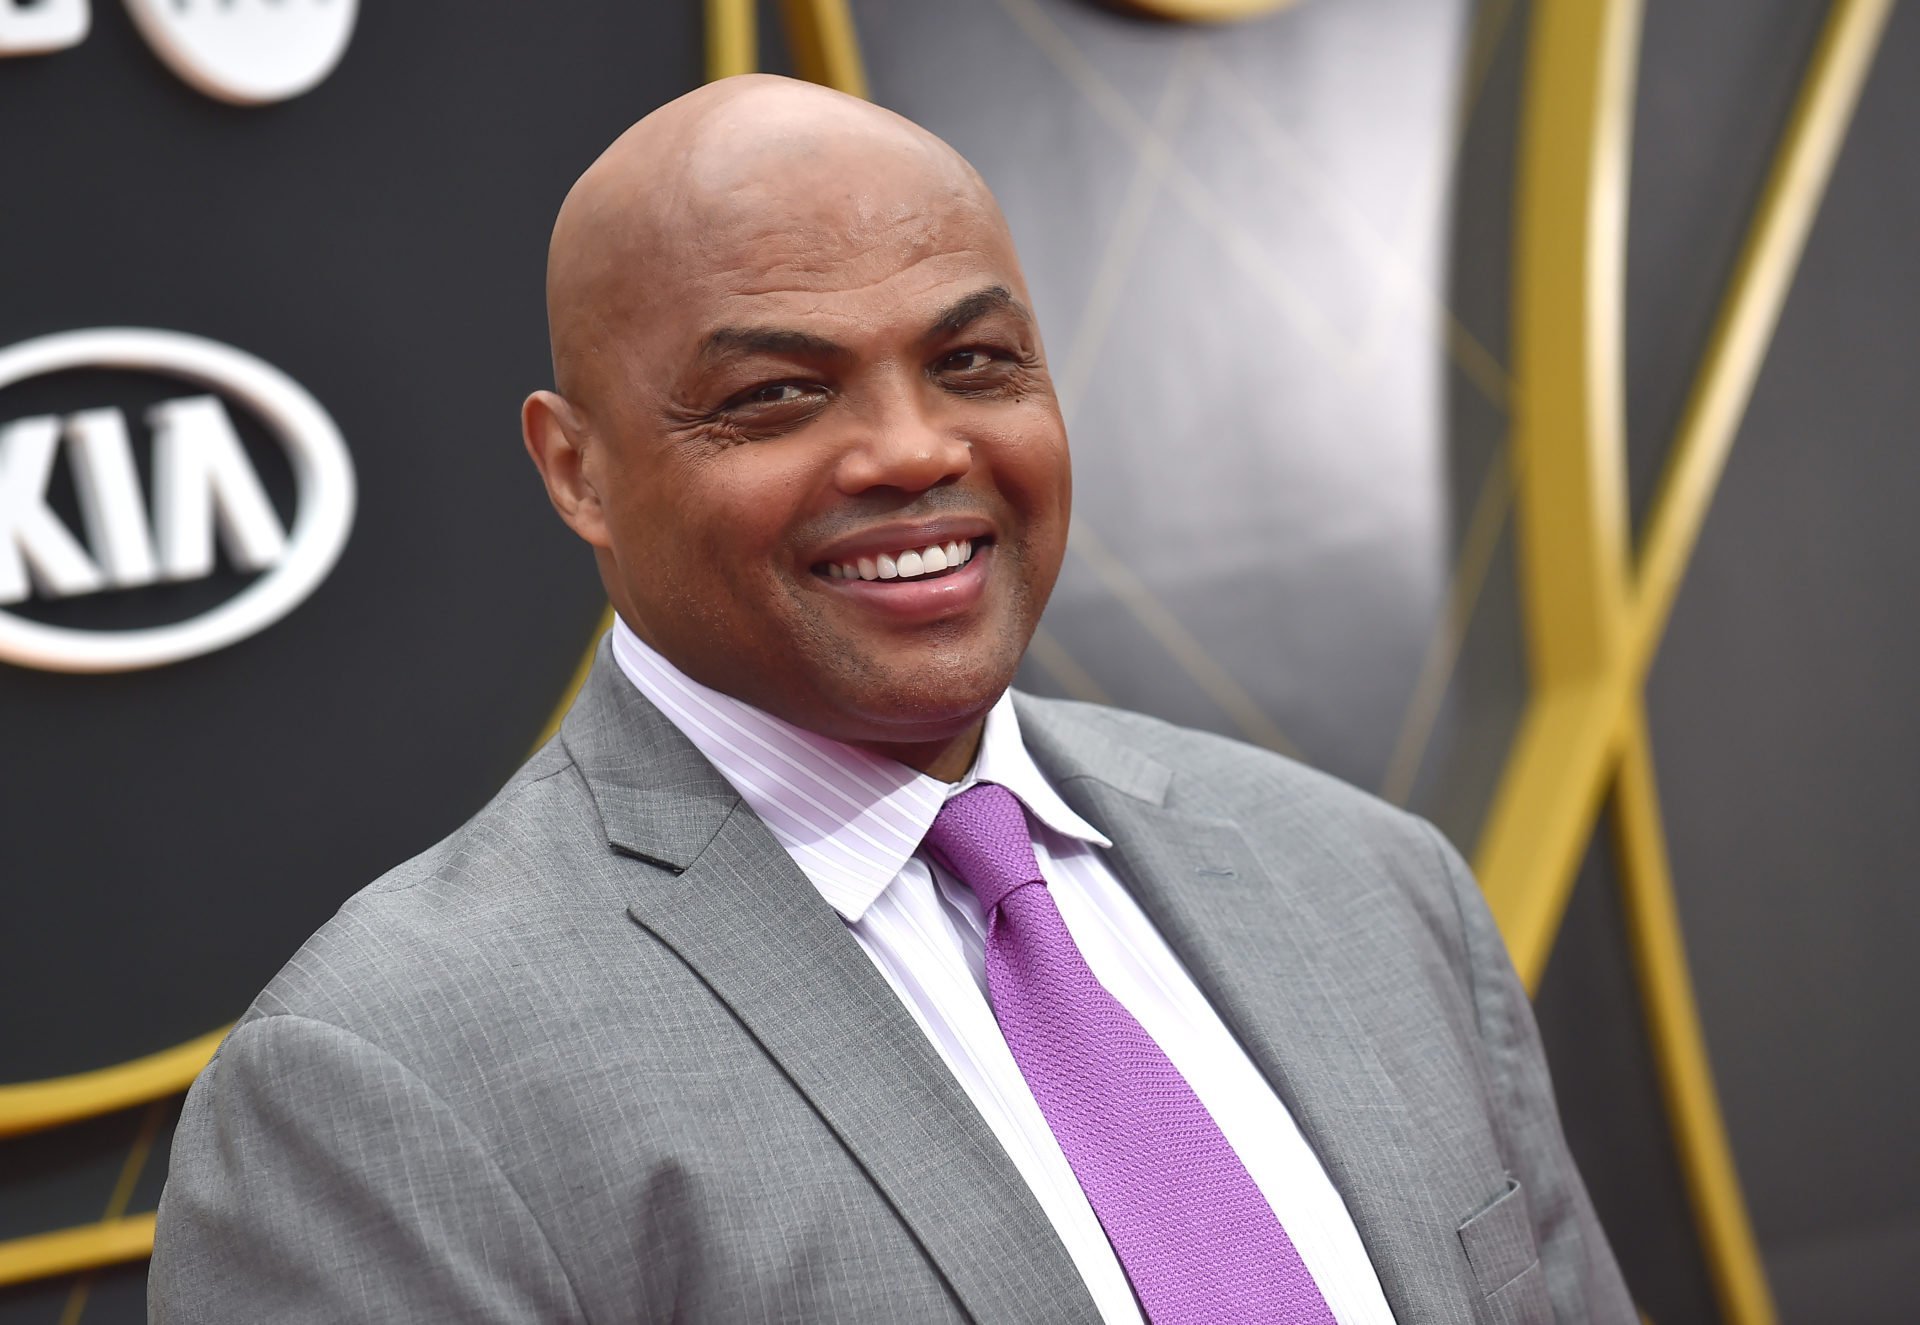 Inside the NBA crew in stitches after joke about Charles Barkley's grandson